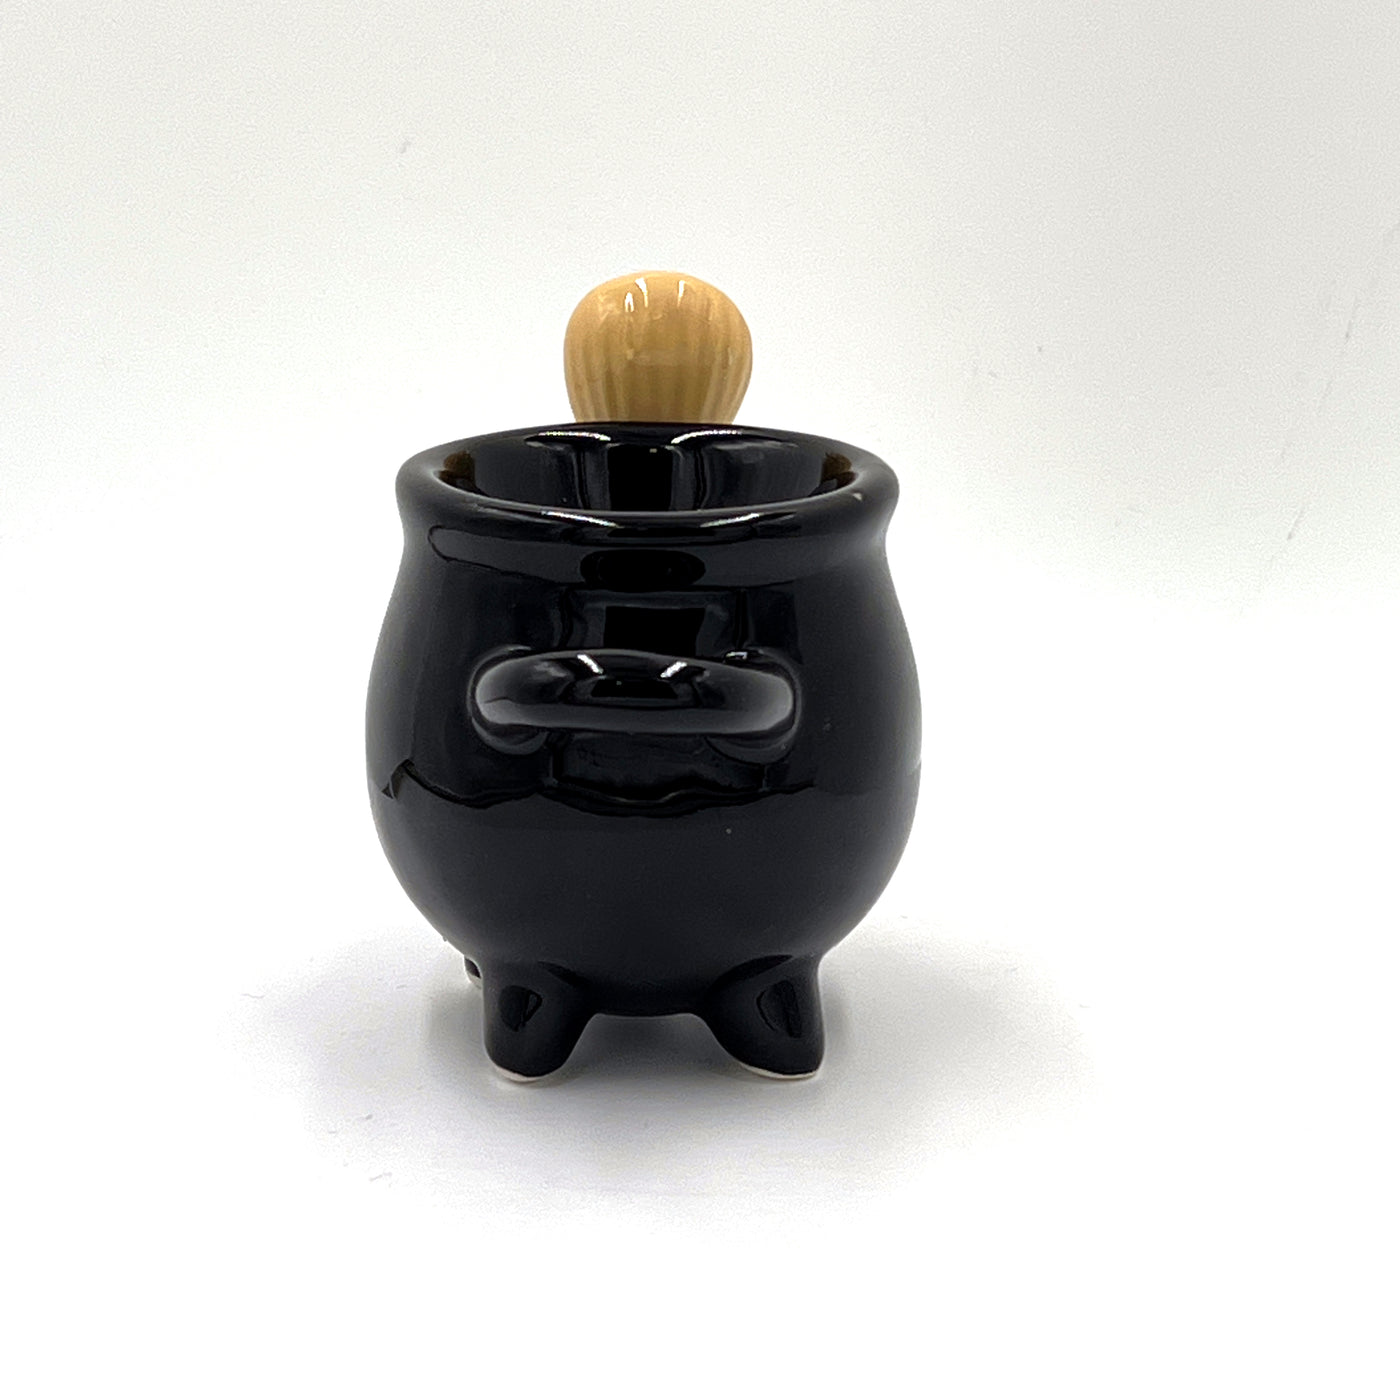 Cauldron Egg Cup with Broom Spoon - TwoBeeps.co.uk